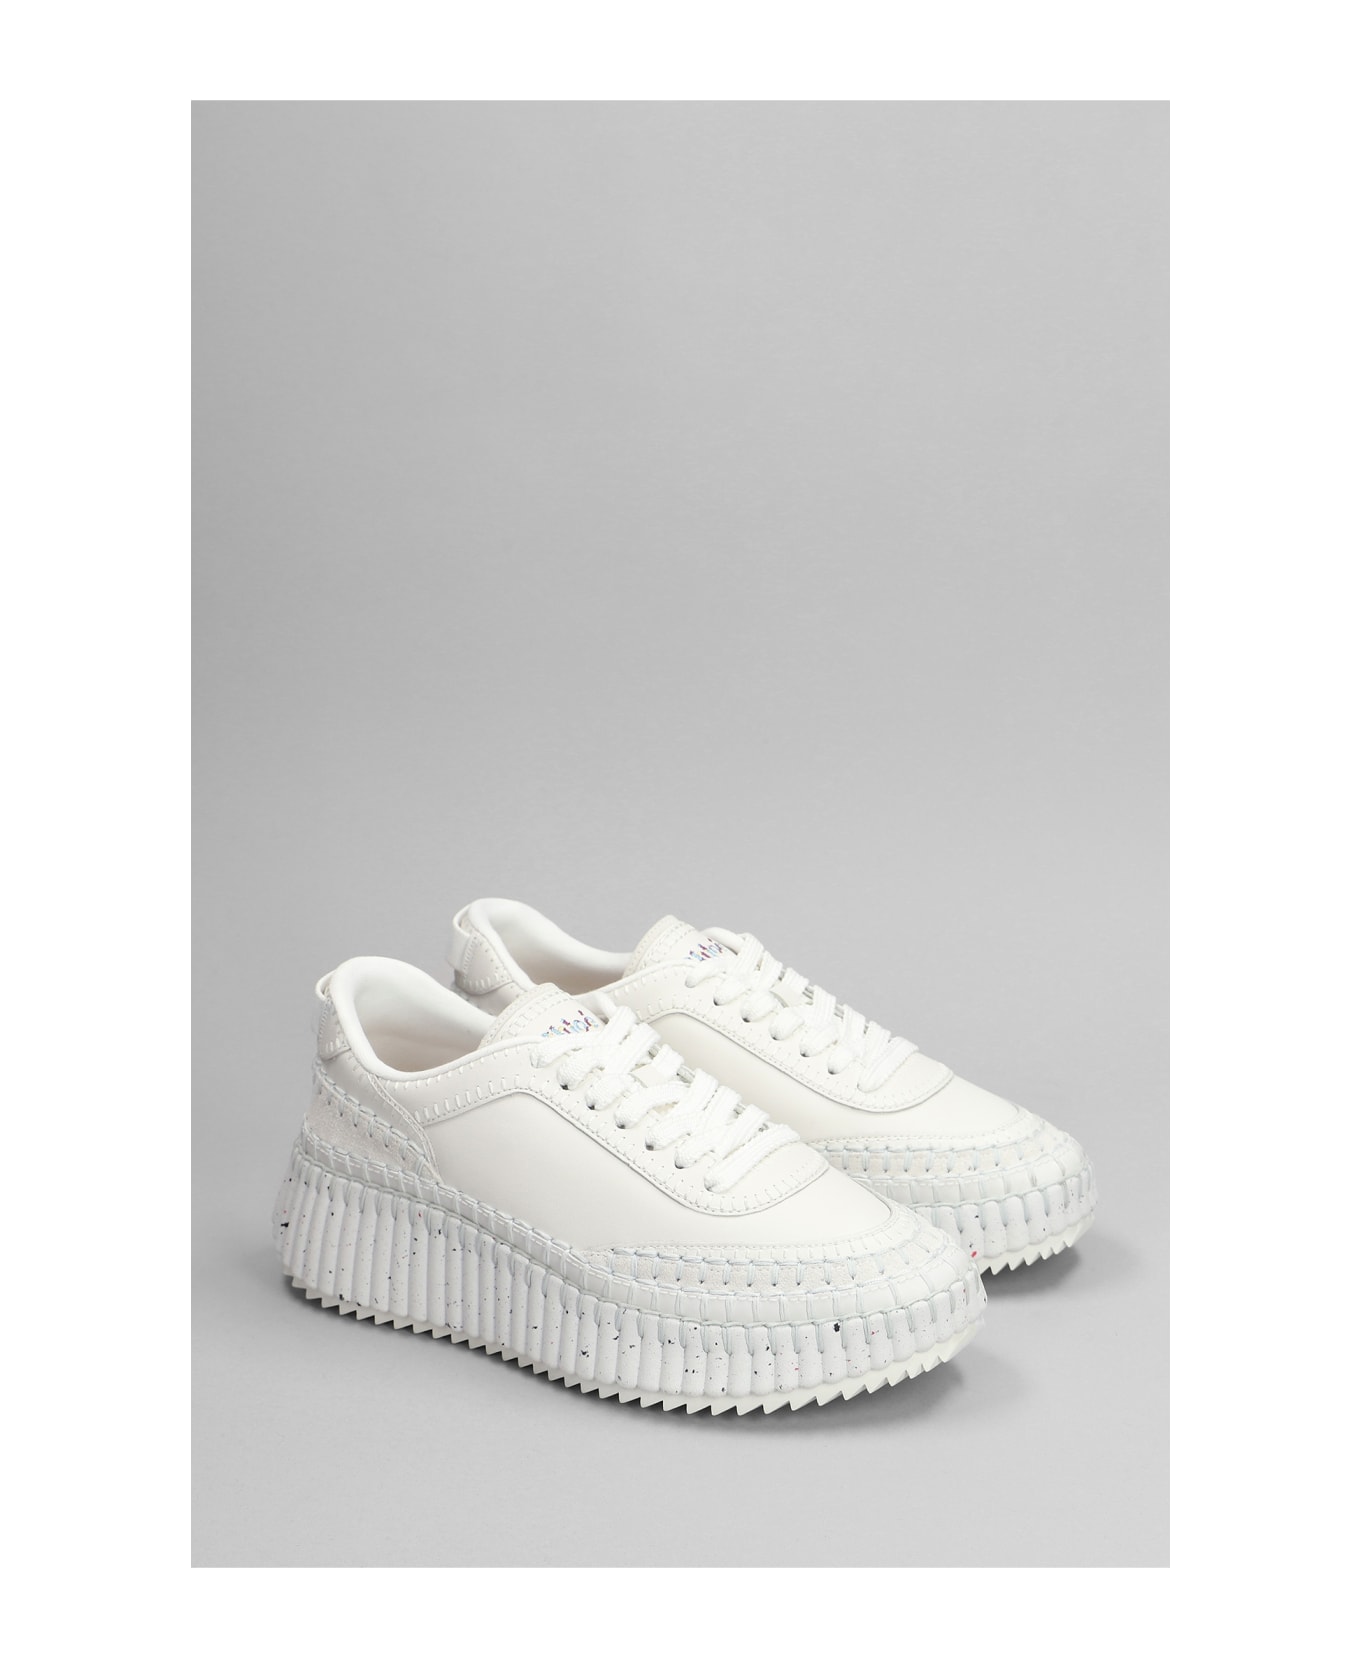 Chloé Nama Sneakers In White Leather - white ウェッジシューズ